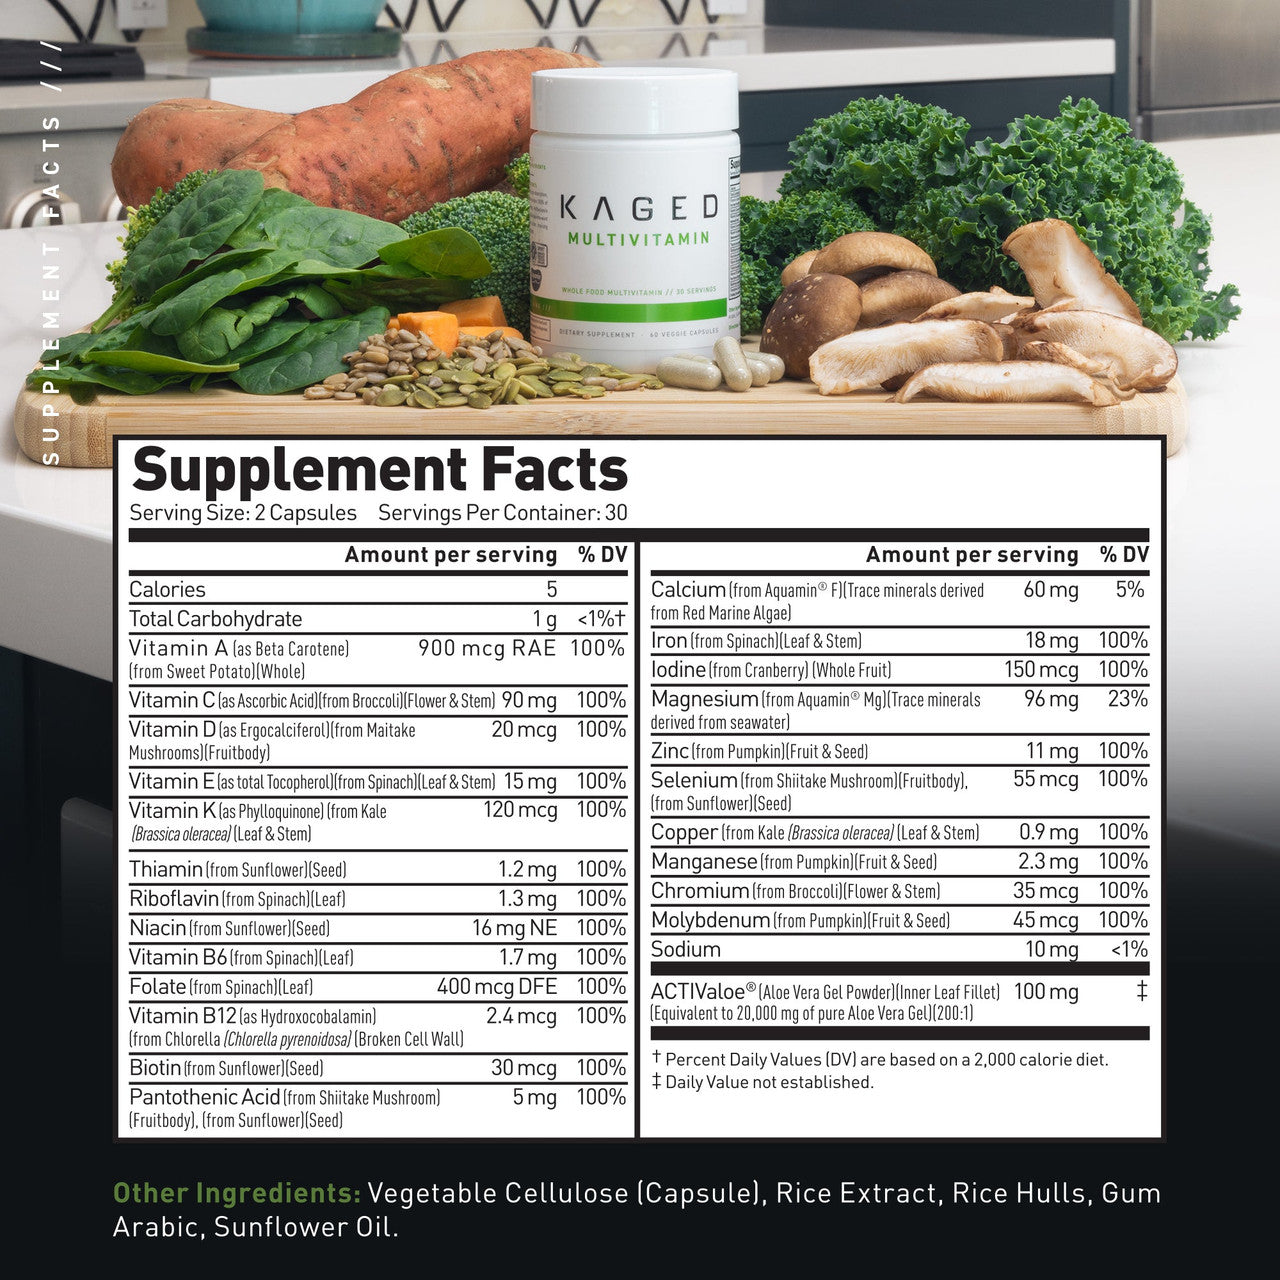 Kaged Muscle Multivitamin Supplemental Facts